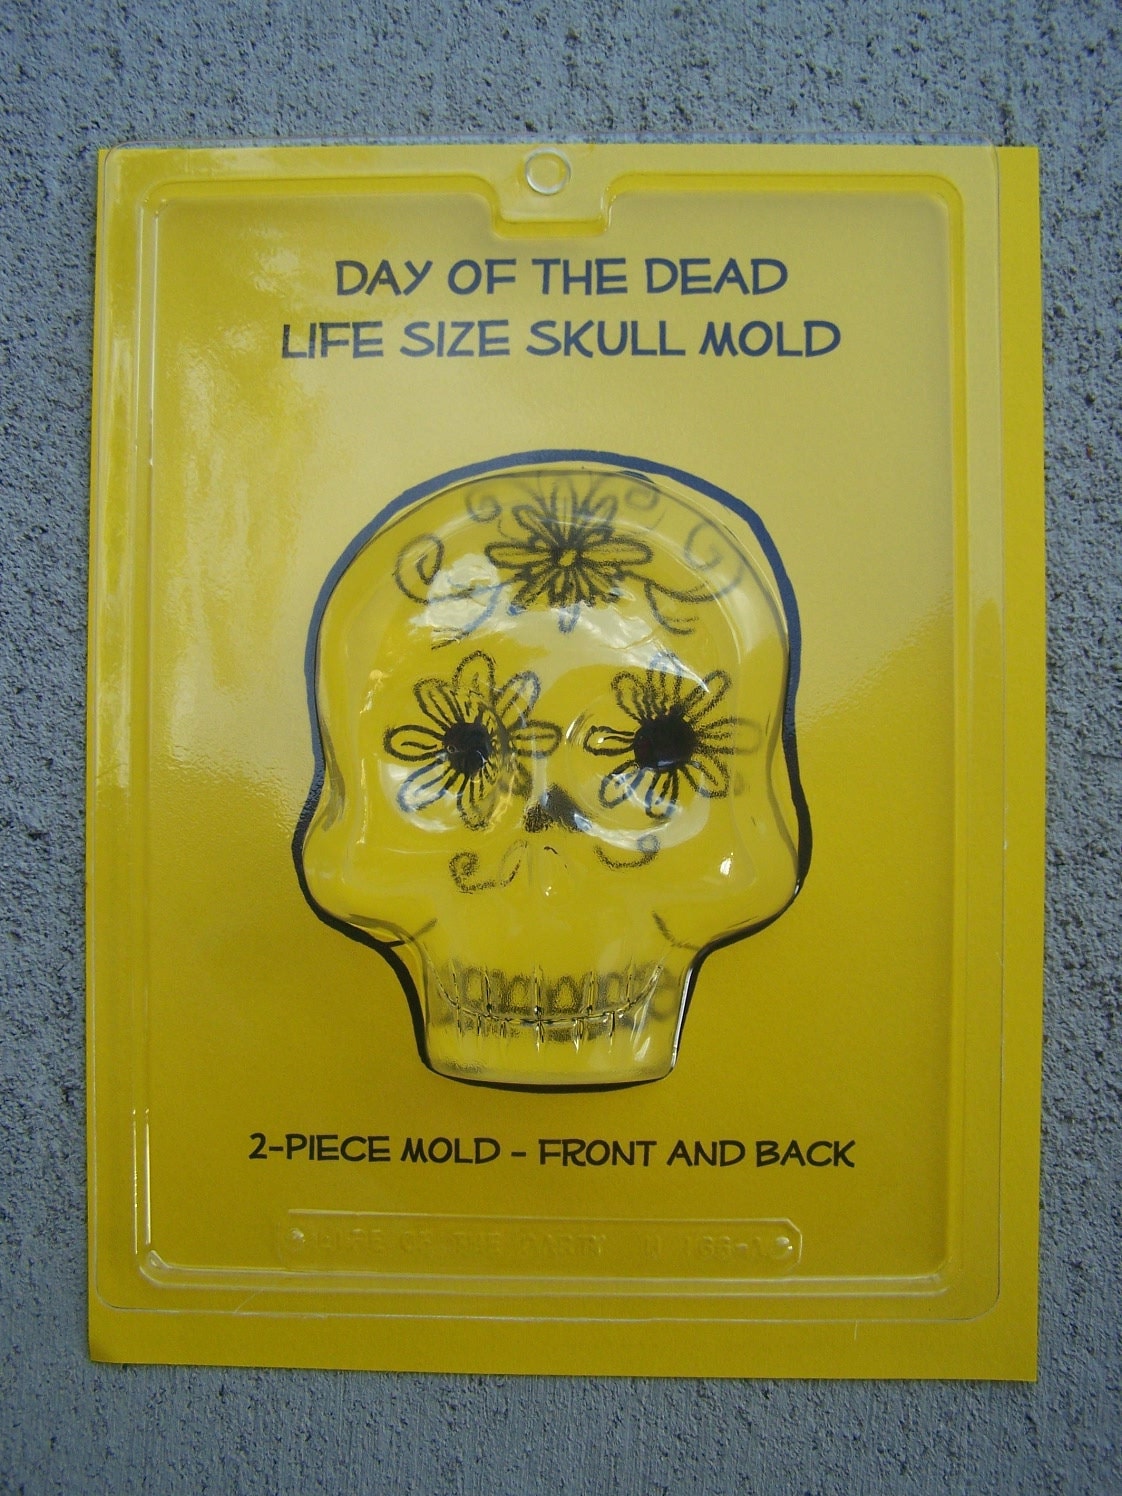 Extra Large XL "Life Size" Sugar Skull Mold - Day of the Dead